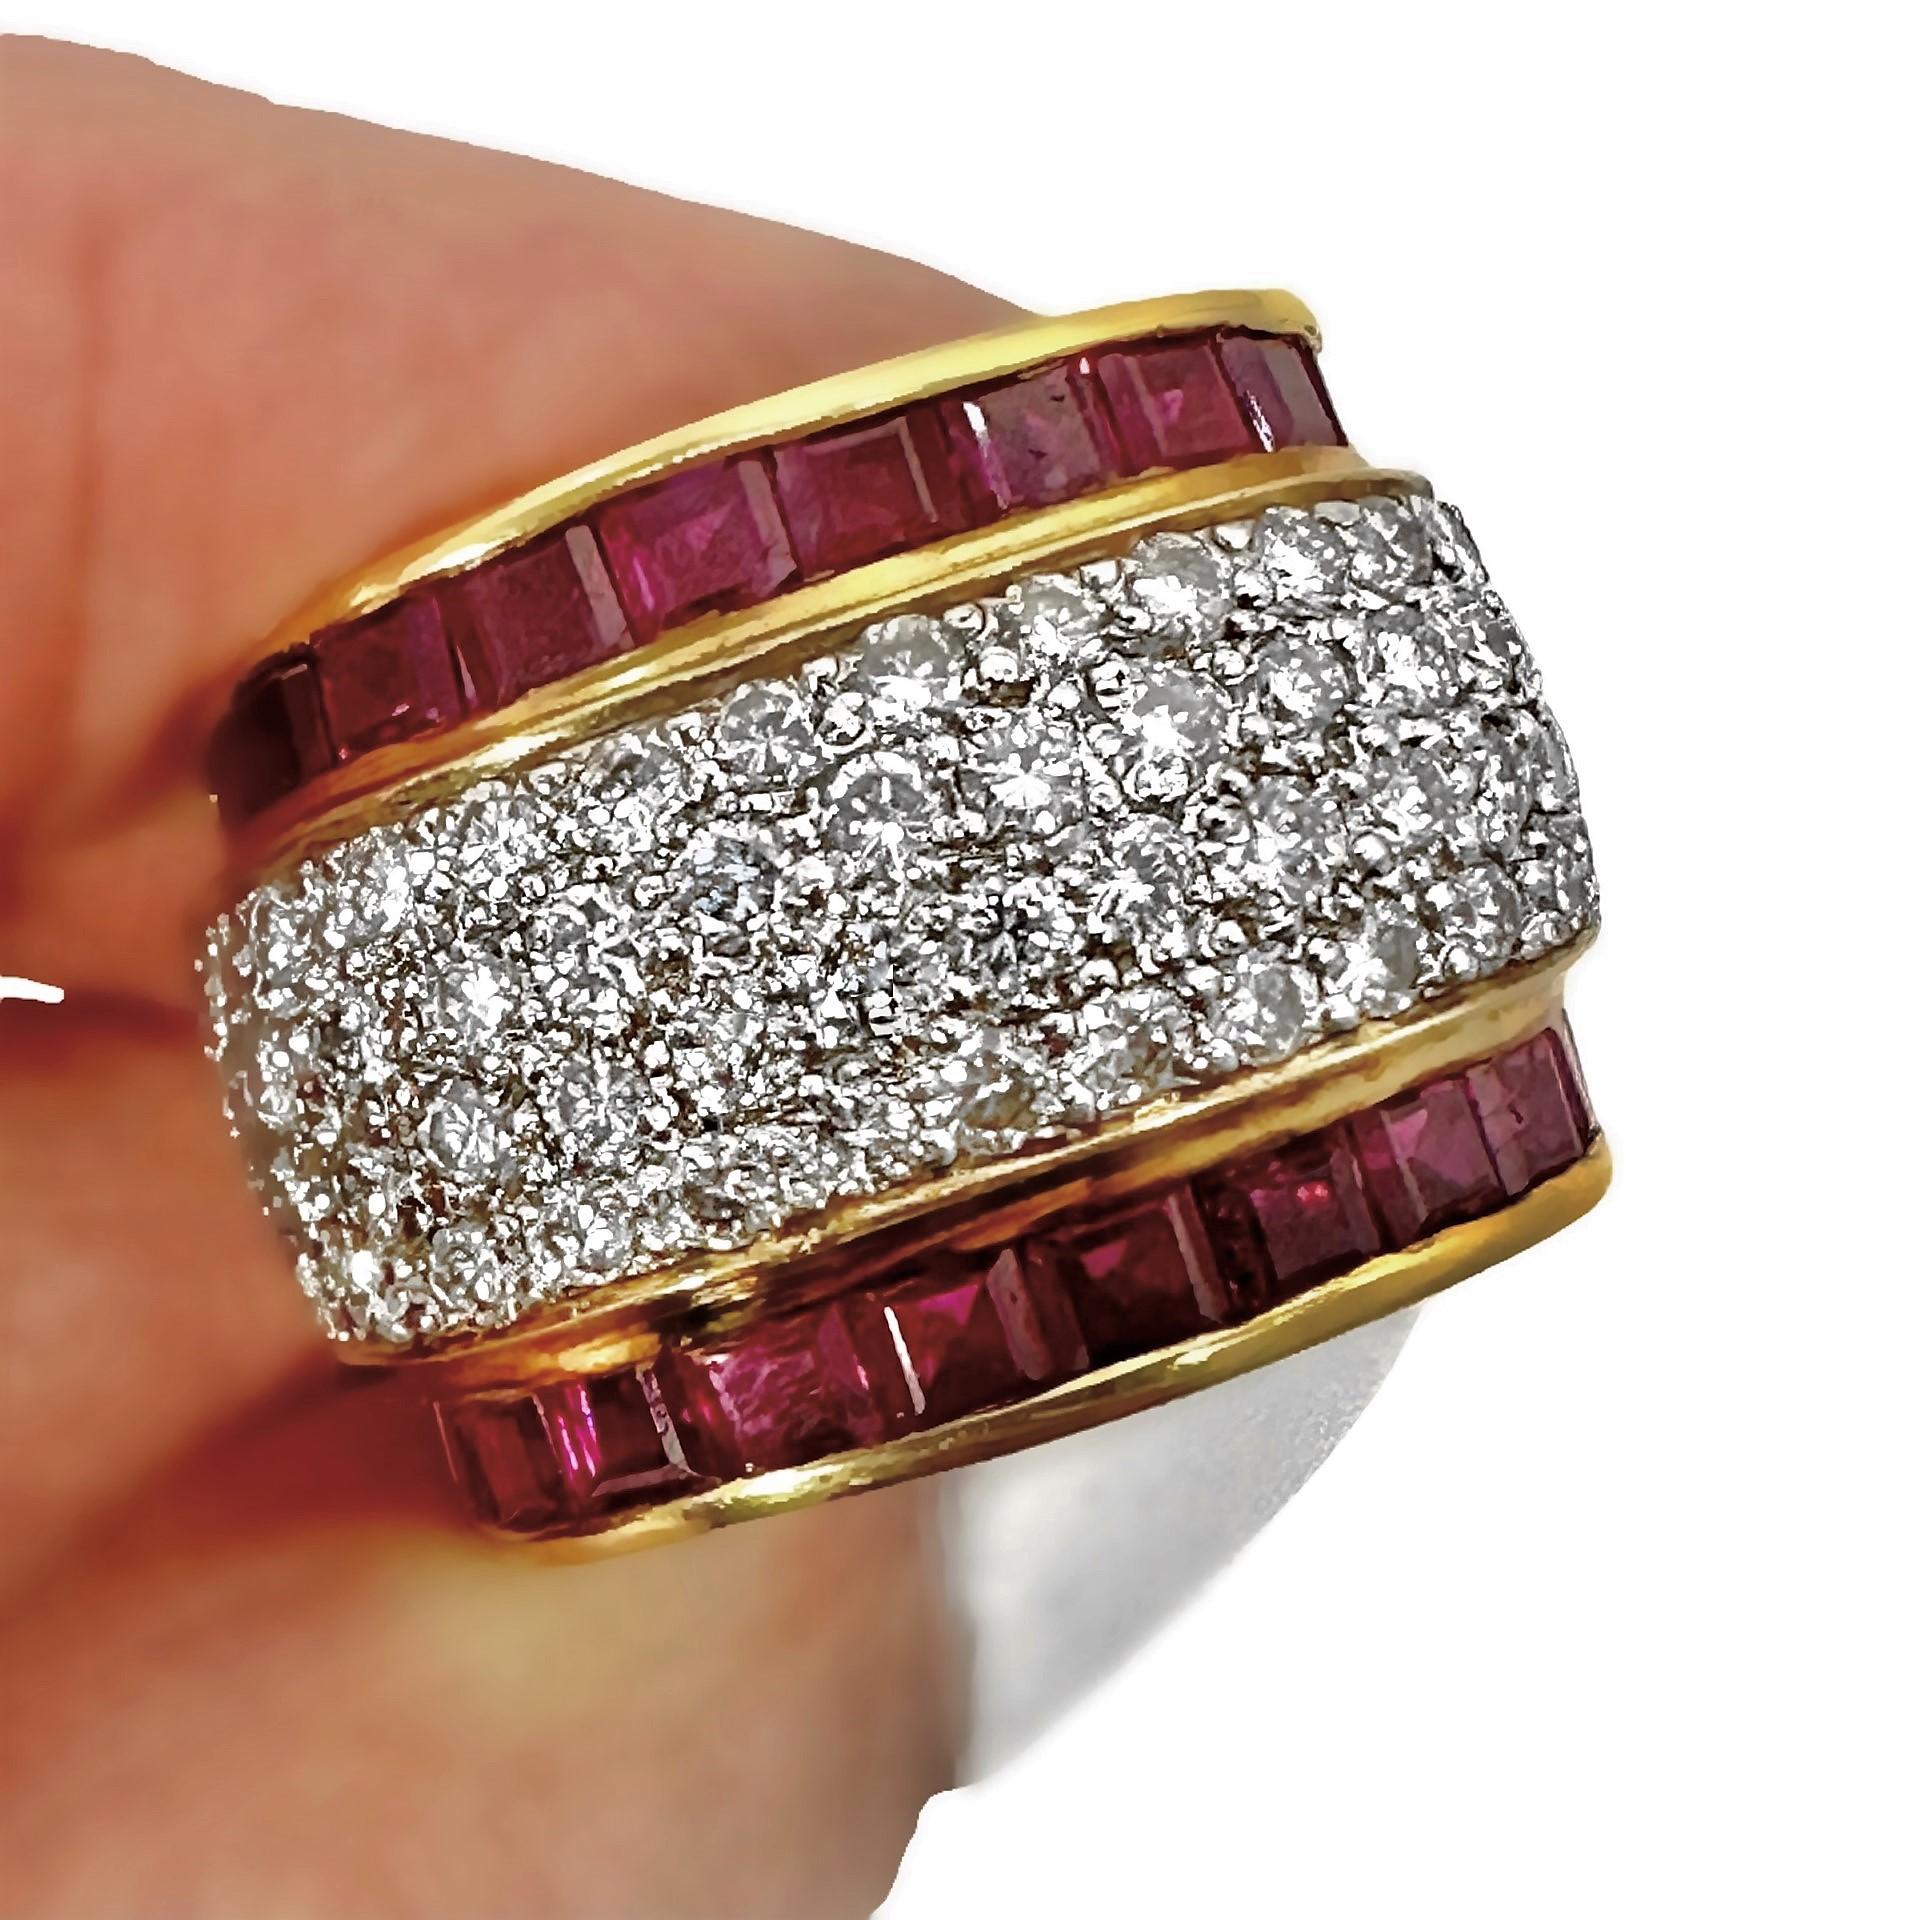 Wide and Tailored 18k Gold Band Ring with Diamonds and Vivid Rubies For Sale 5